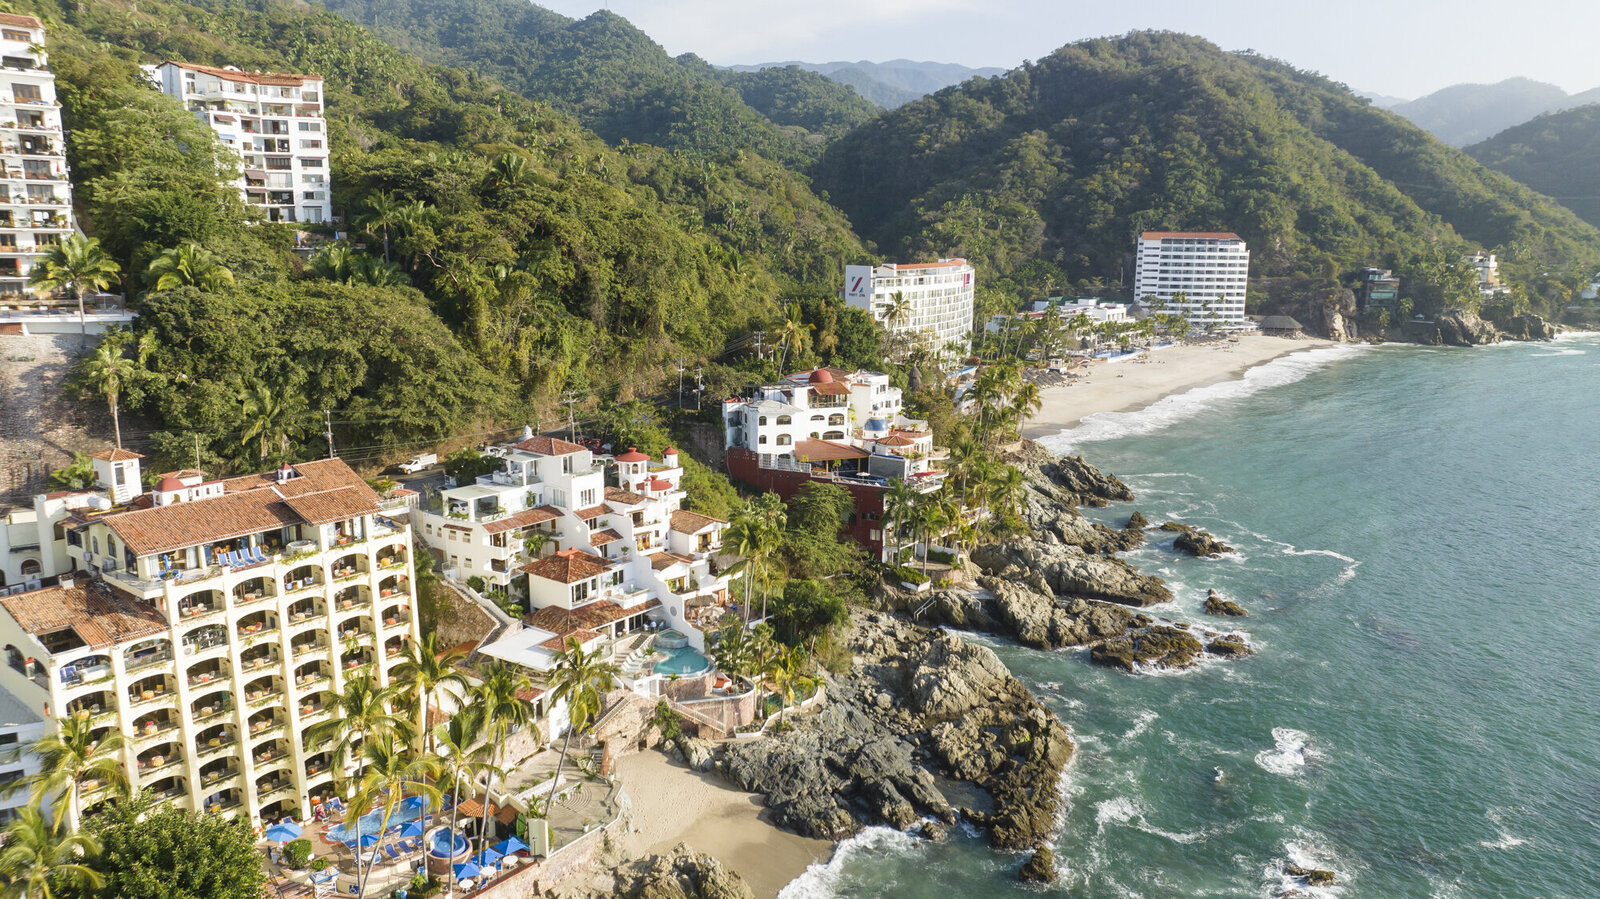 Aerial view of a coastal resort area, a prime location for a destination wedding photographer, with buildings nestled between a lush hillside and a sandy beach.